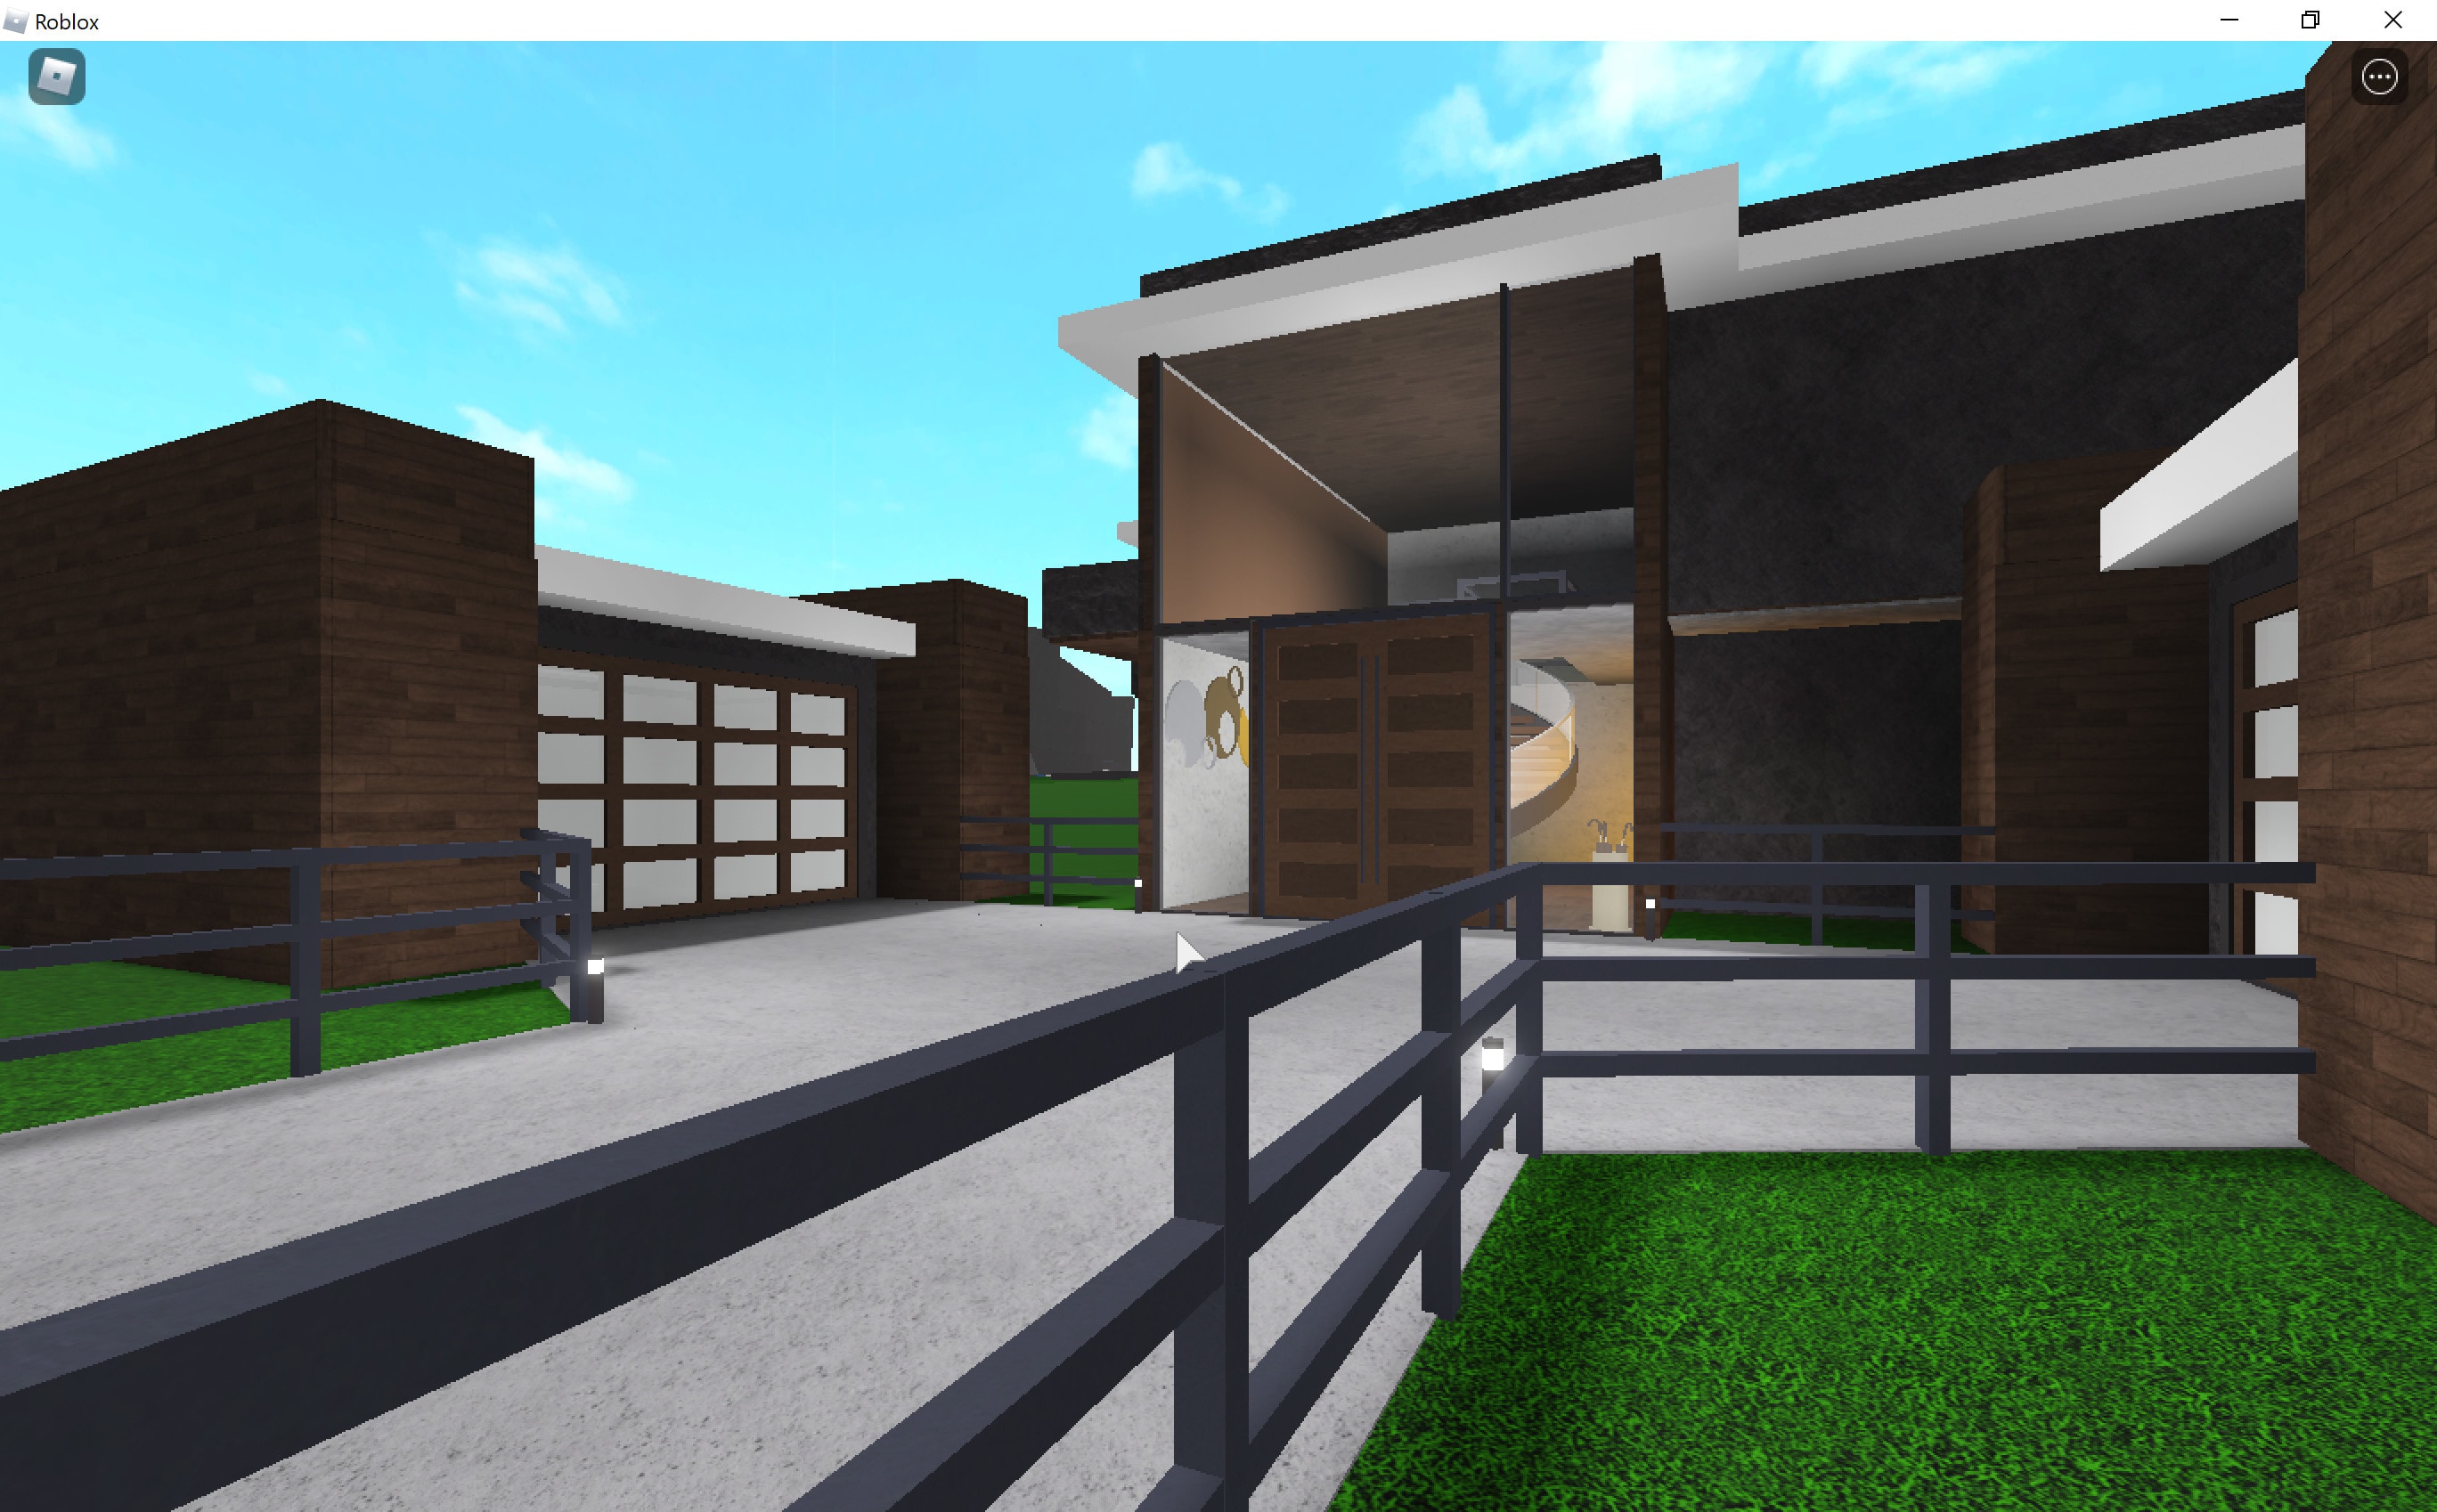 Build You Anything In Bloxburg From Towns To Dream Homes By Mythiiq Yt - union roblox roblox myth fanart roblox bloxburg houses